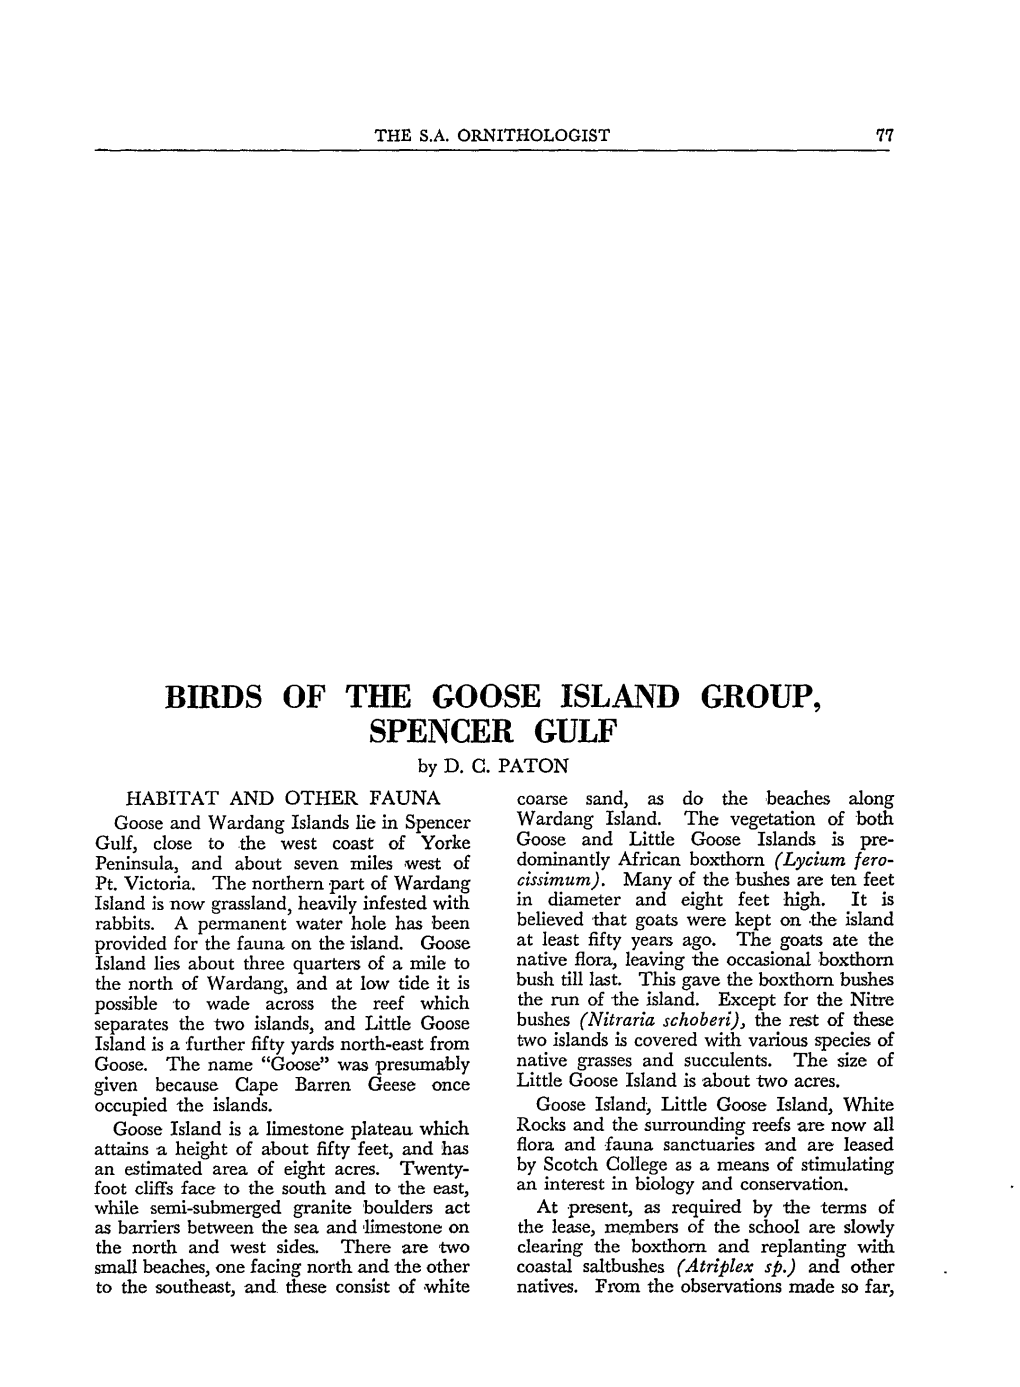 BIRDS of the GOOSE ISLAND GROUP, SPENCER GULF by D